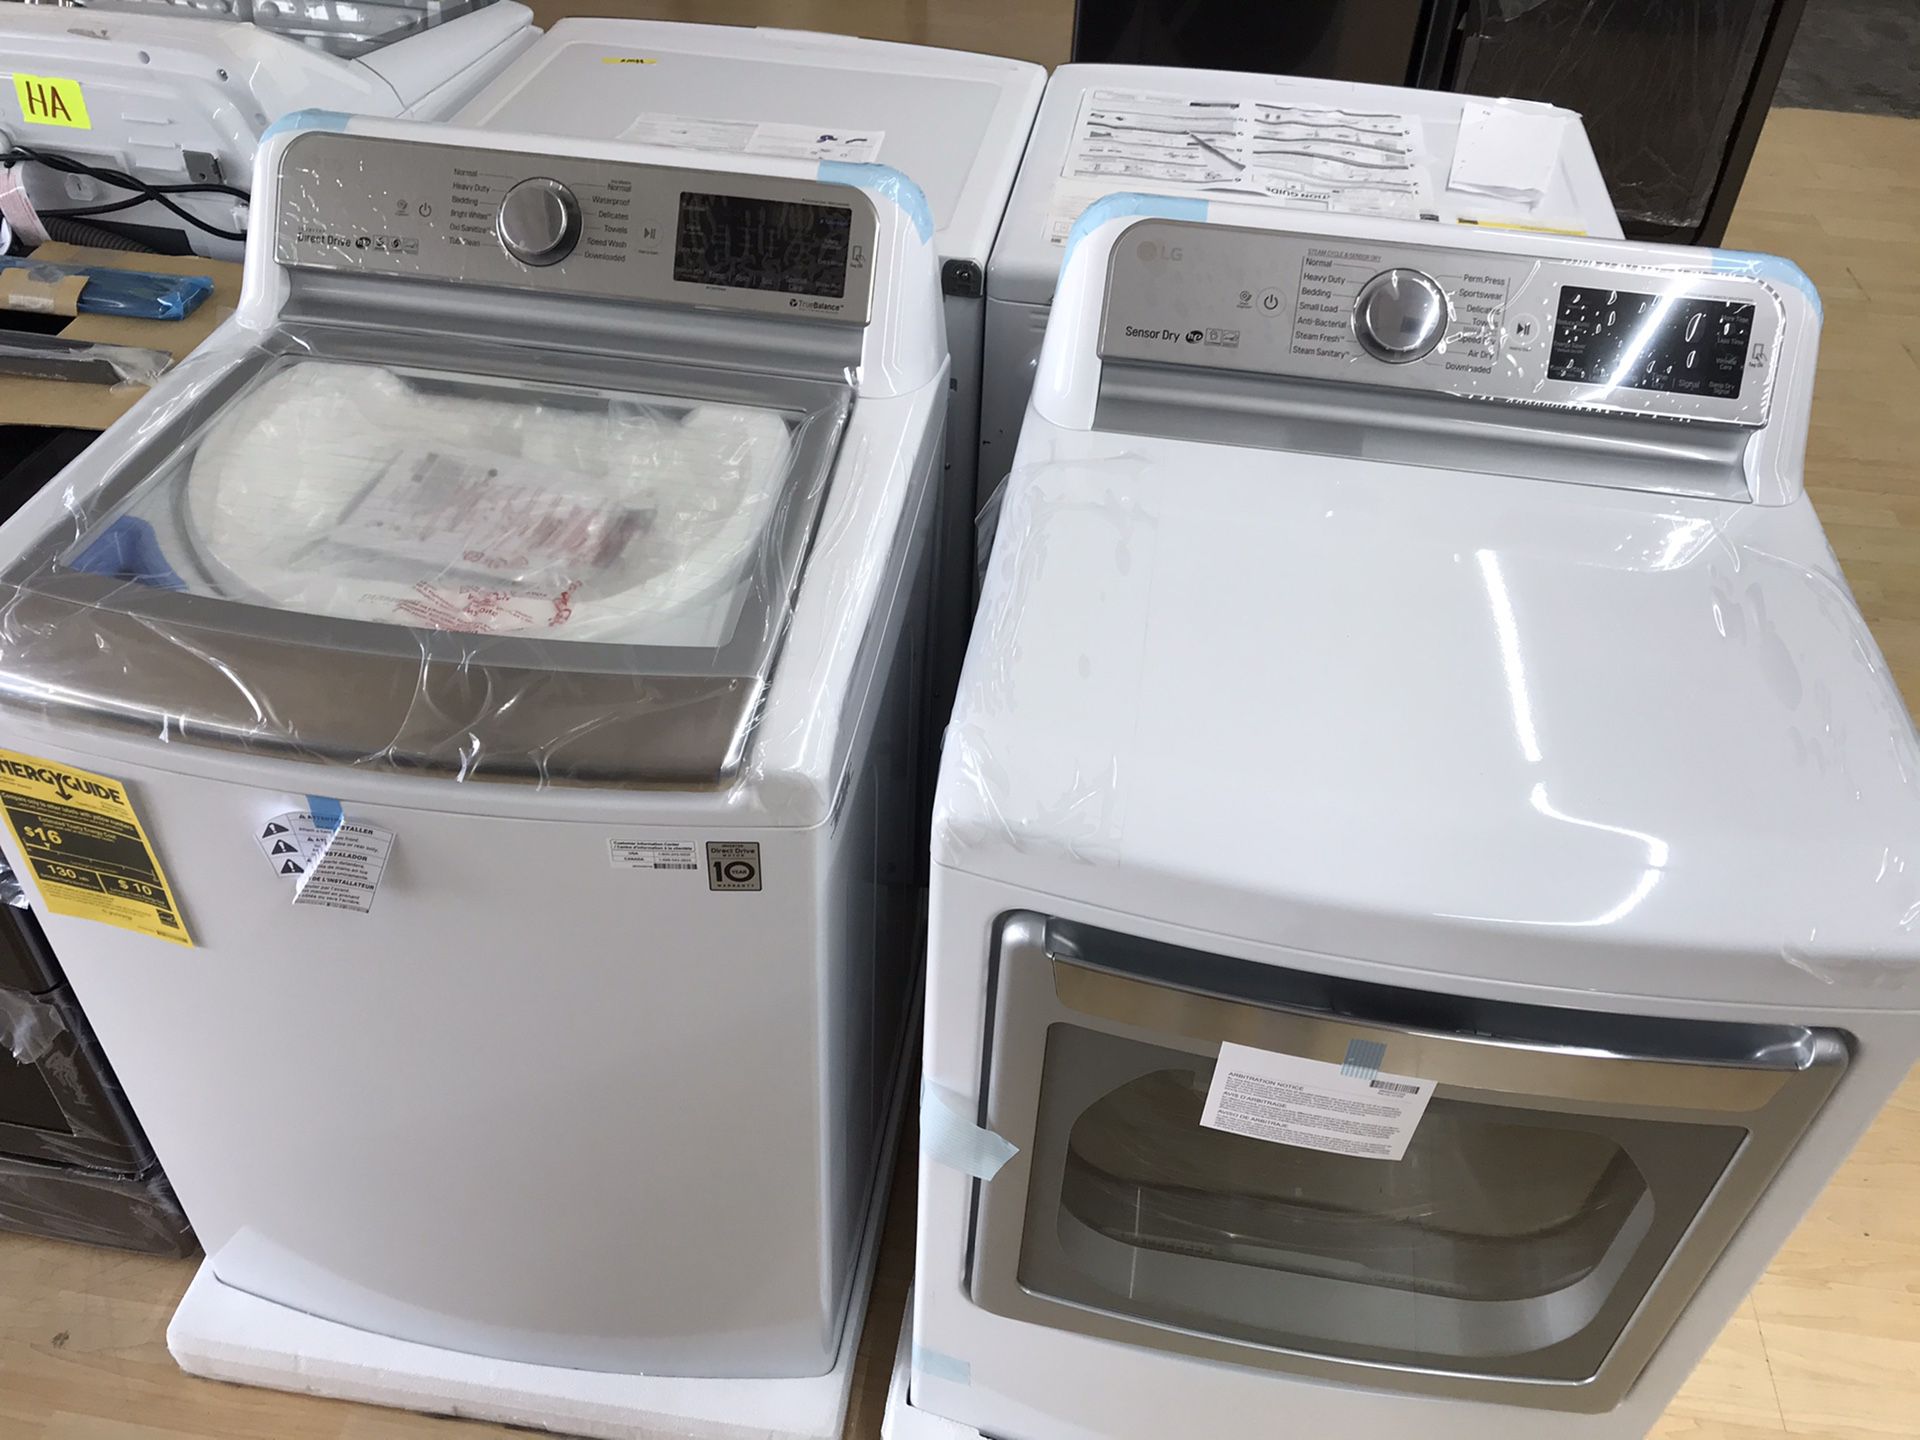 Brand new top load washer and dryer set